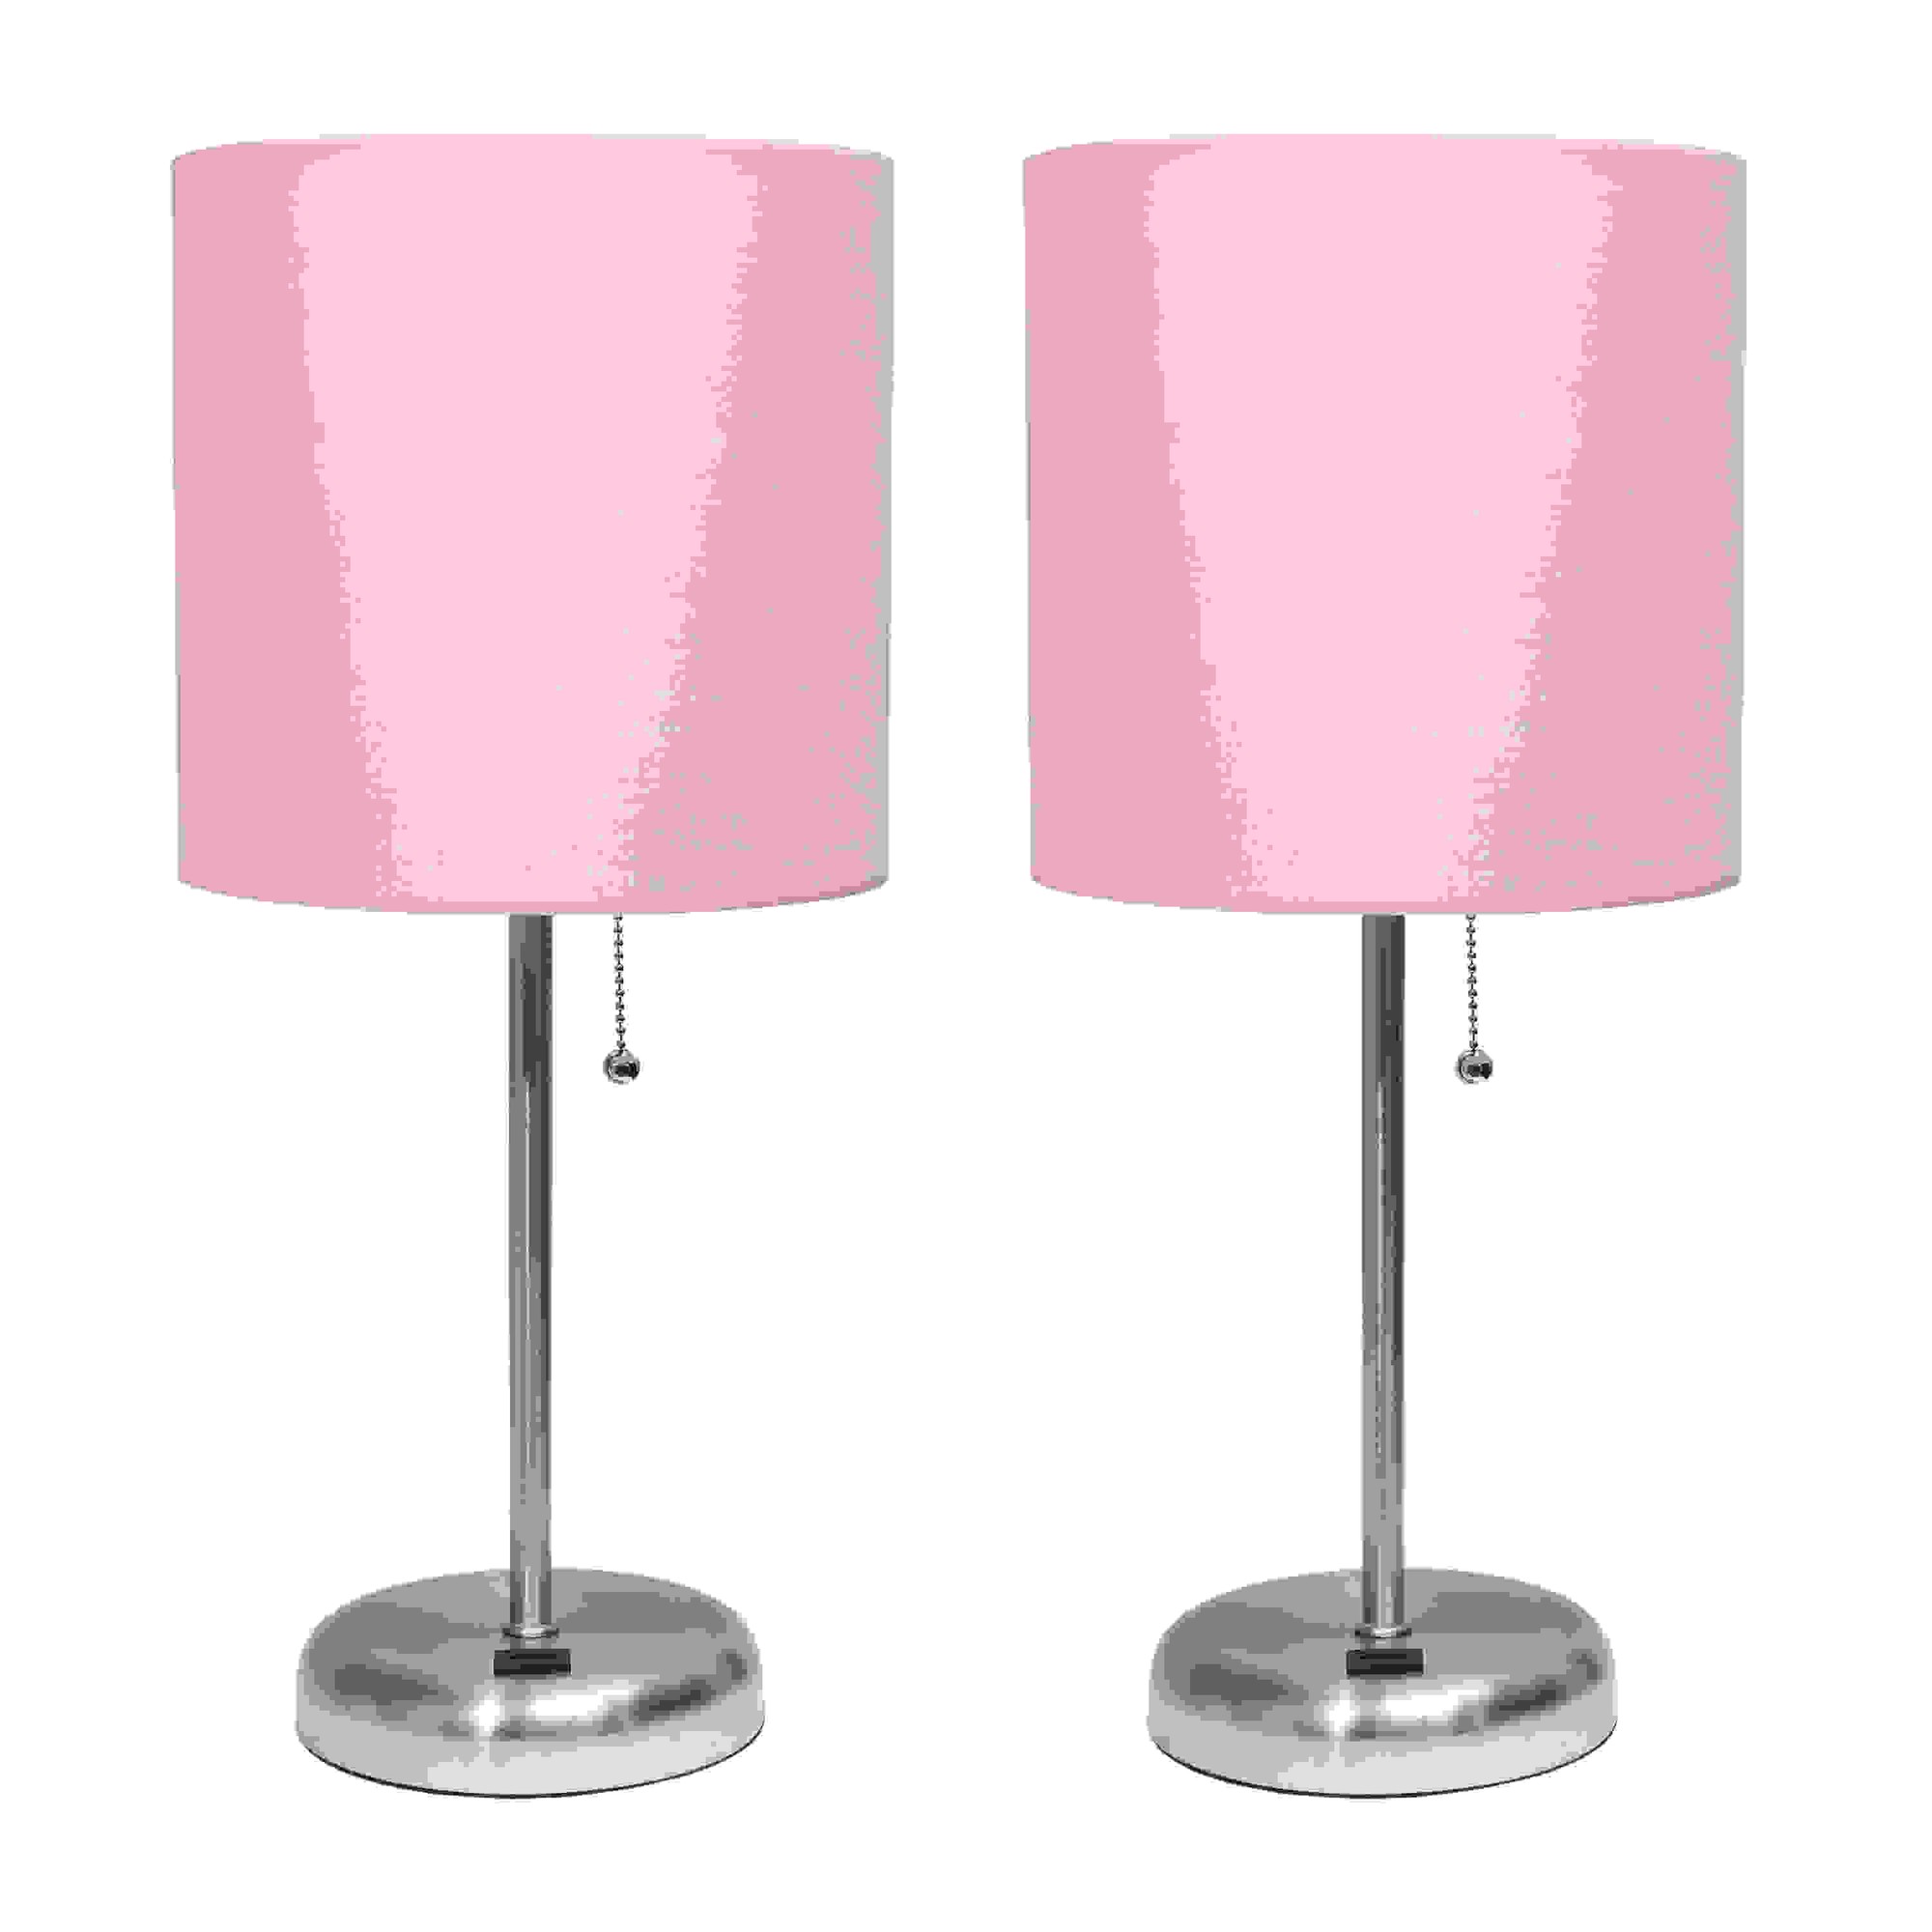 Simple Designs Stick Lamp with USB charging port and Fabric Shade 2 Pack Set, Light Pink